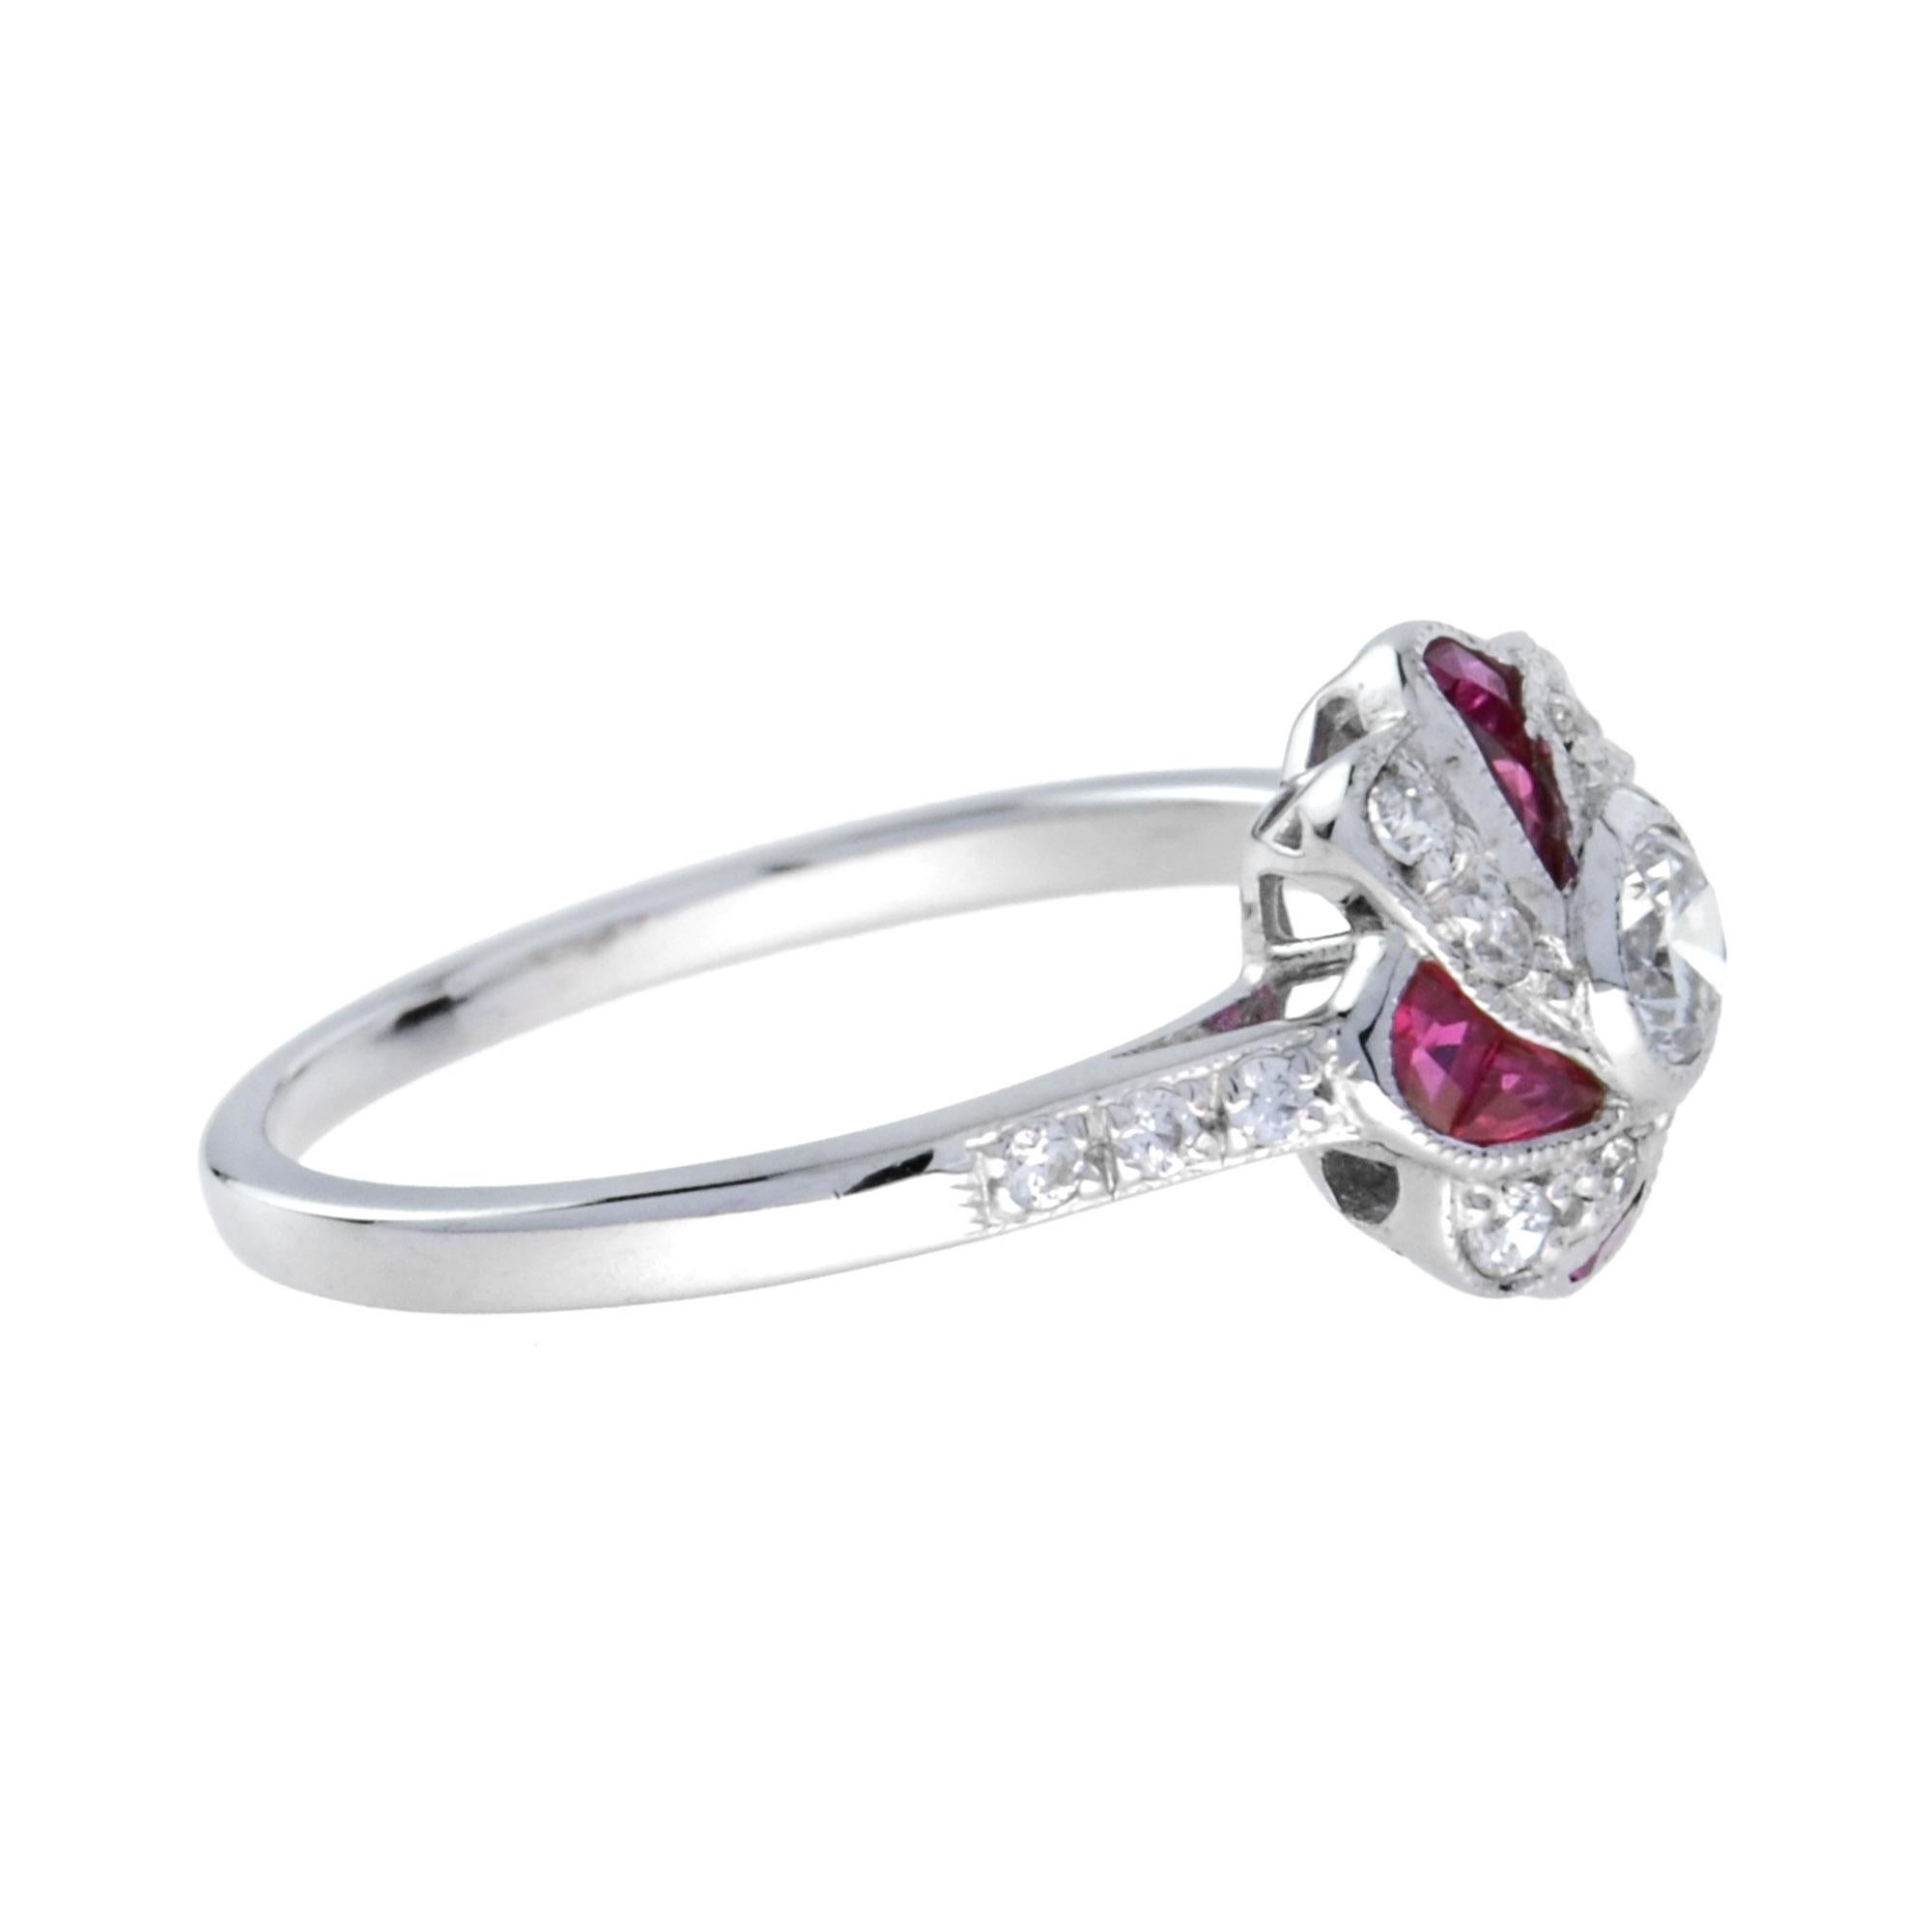 For Sale:  Art Deco Style Diamond and Ruby Floral Engagement Ring in 18K White Gold 4